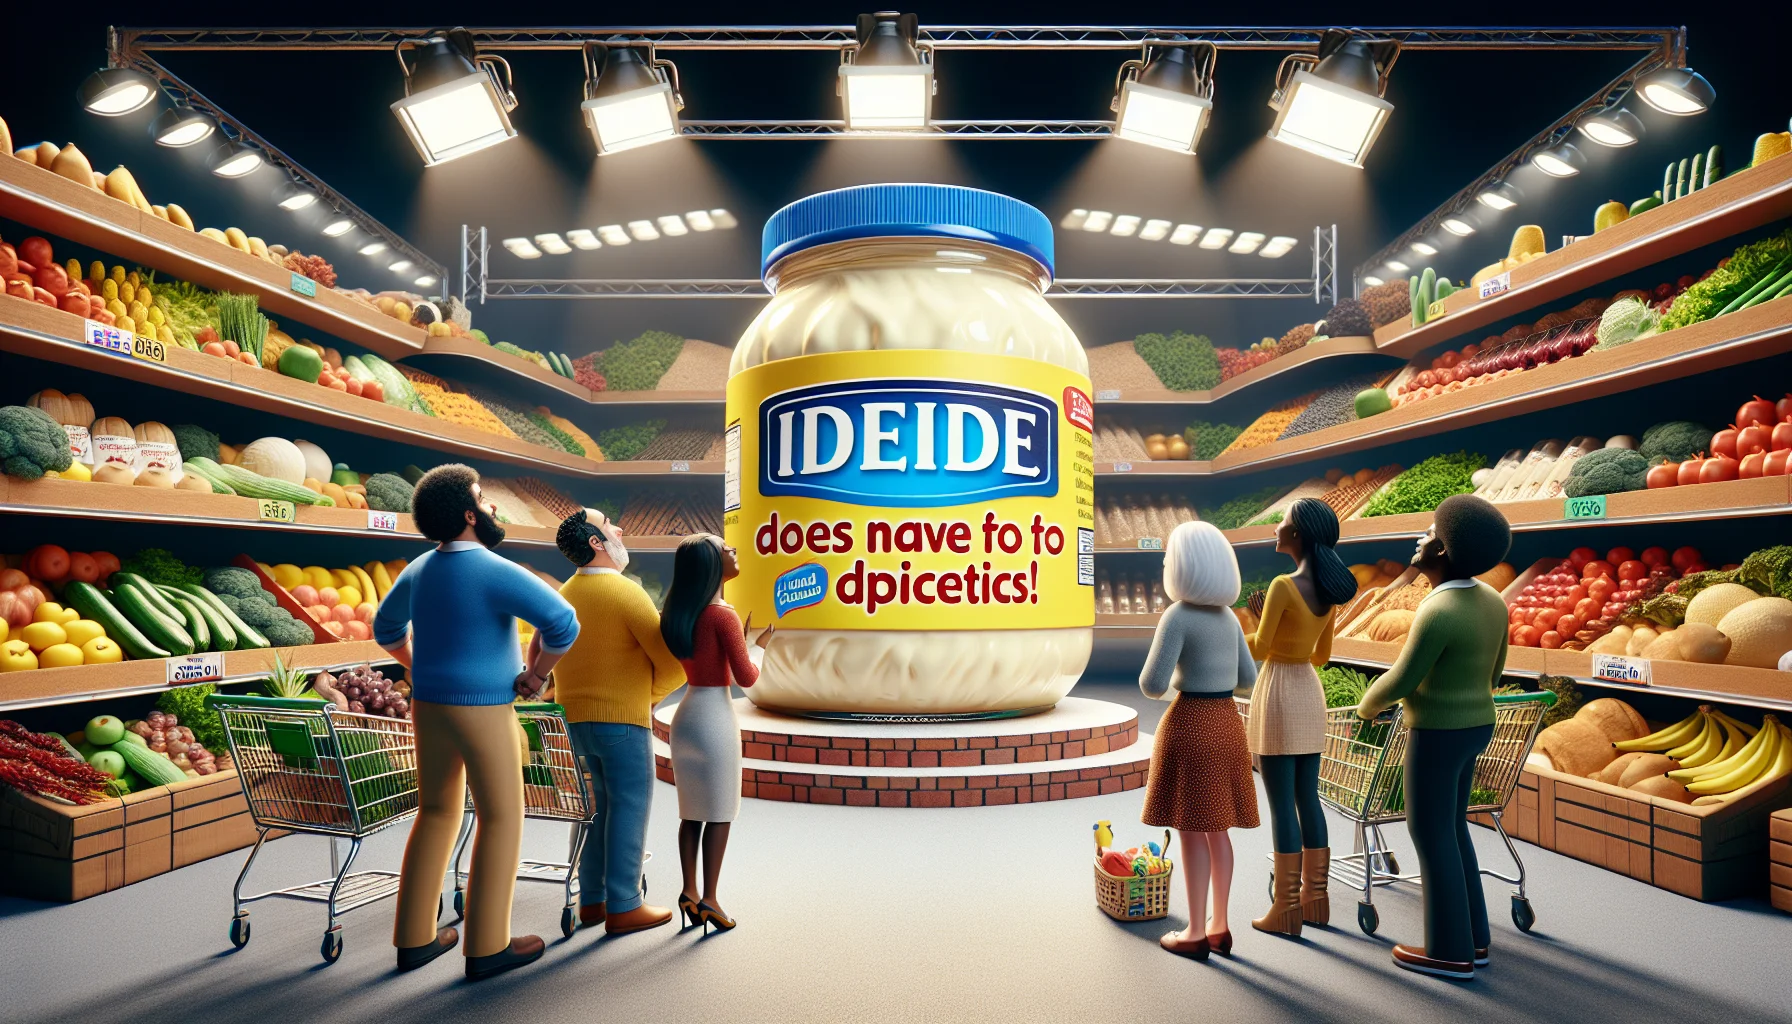 Generate an image of an amusing, creative and realistic scene set in a grocery store. In the heart of the scene, a jar of mayonnaise is on a pedestal, surrounded by spotlights, with a huge colorful sign that reads, 'Ideal for Diabetics!'. A diverse group of customers, including a Middle-Eastern man, a Hispanic woman, a South Asian teenager, and a Black senior are gazing at the jar with astonishment. Their shopping carts are filled with fruits, vegetables, and whole grains. On the side, there is a large banner saying, 'Healthy does not have to be pricey!'